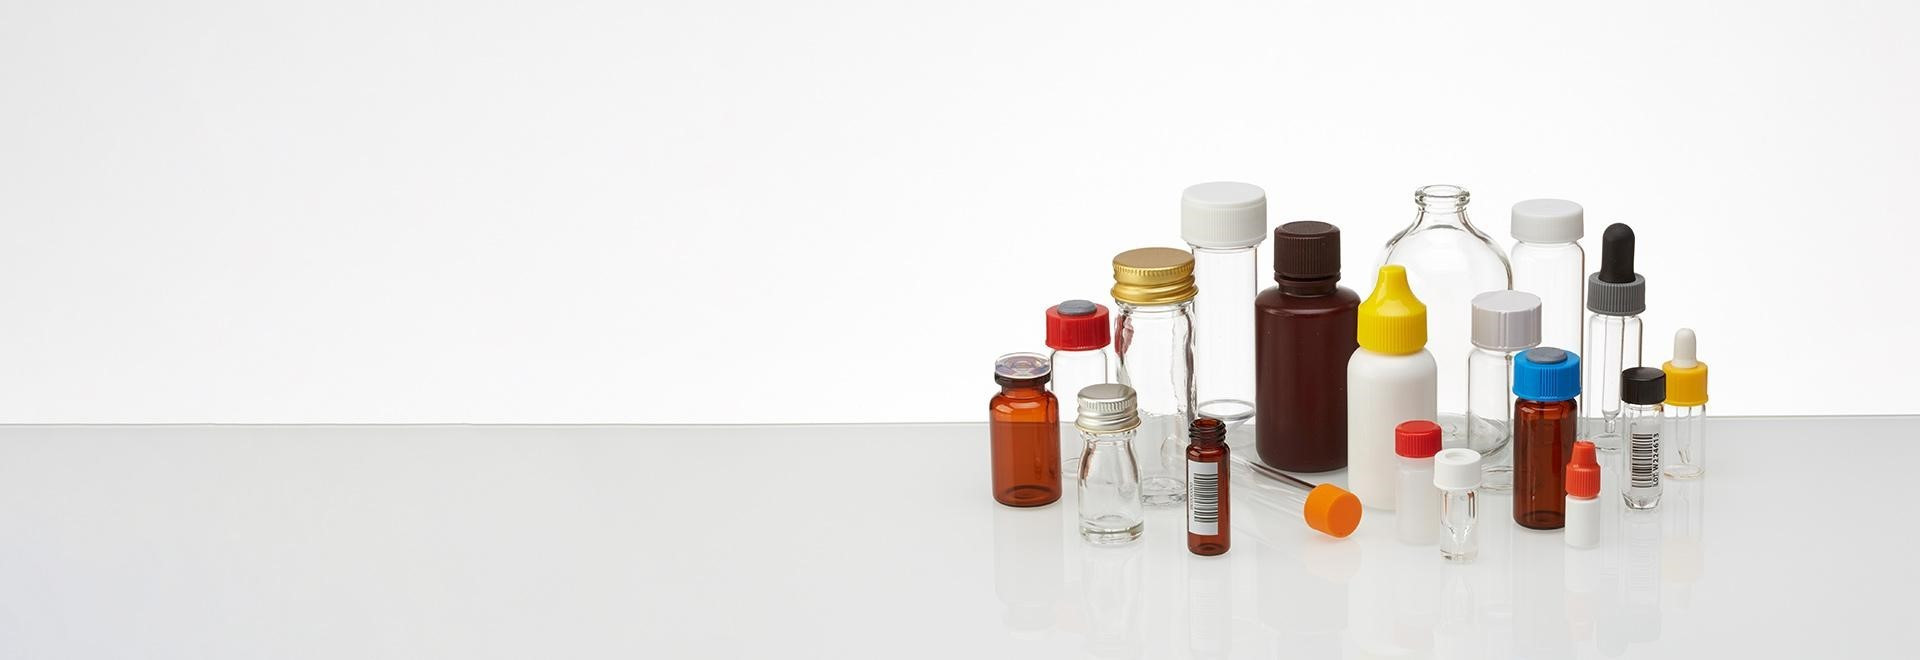 5-types-of-wheaton-life-science-glass-bottles-products